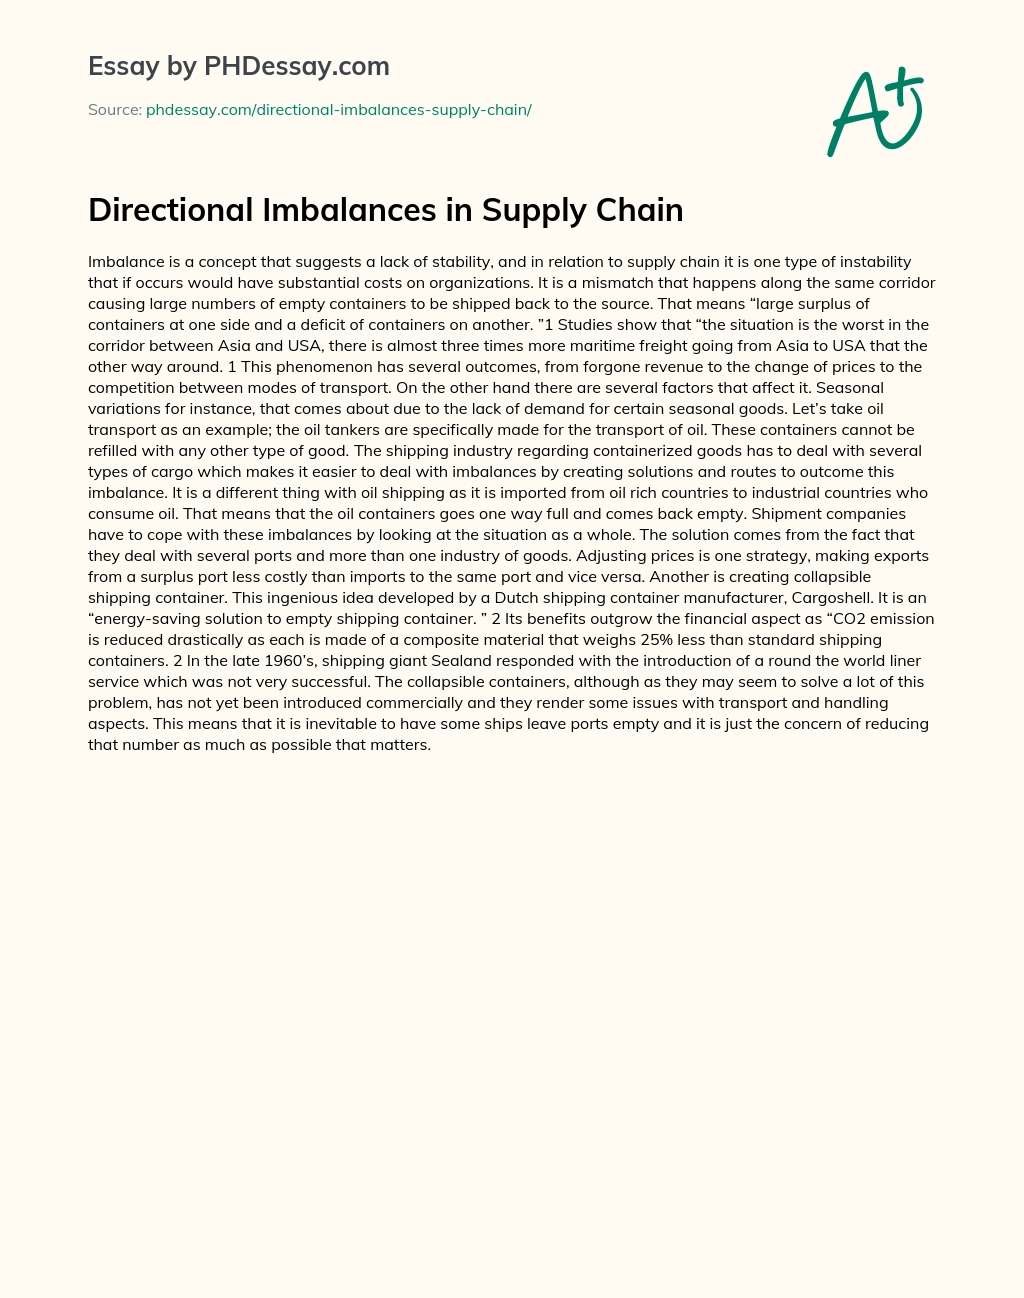 Directional Imbalances in Supply Chain essay